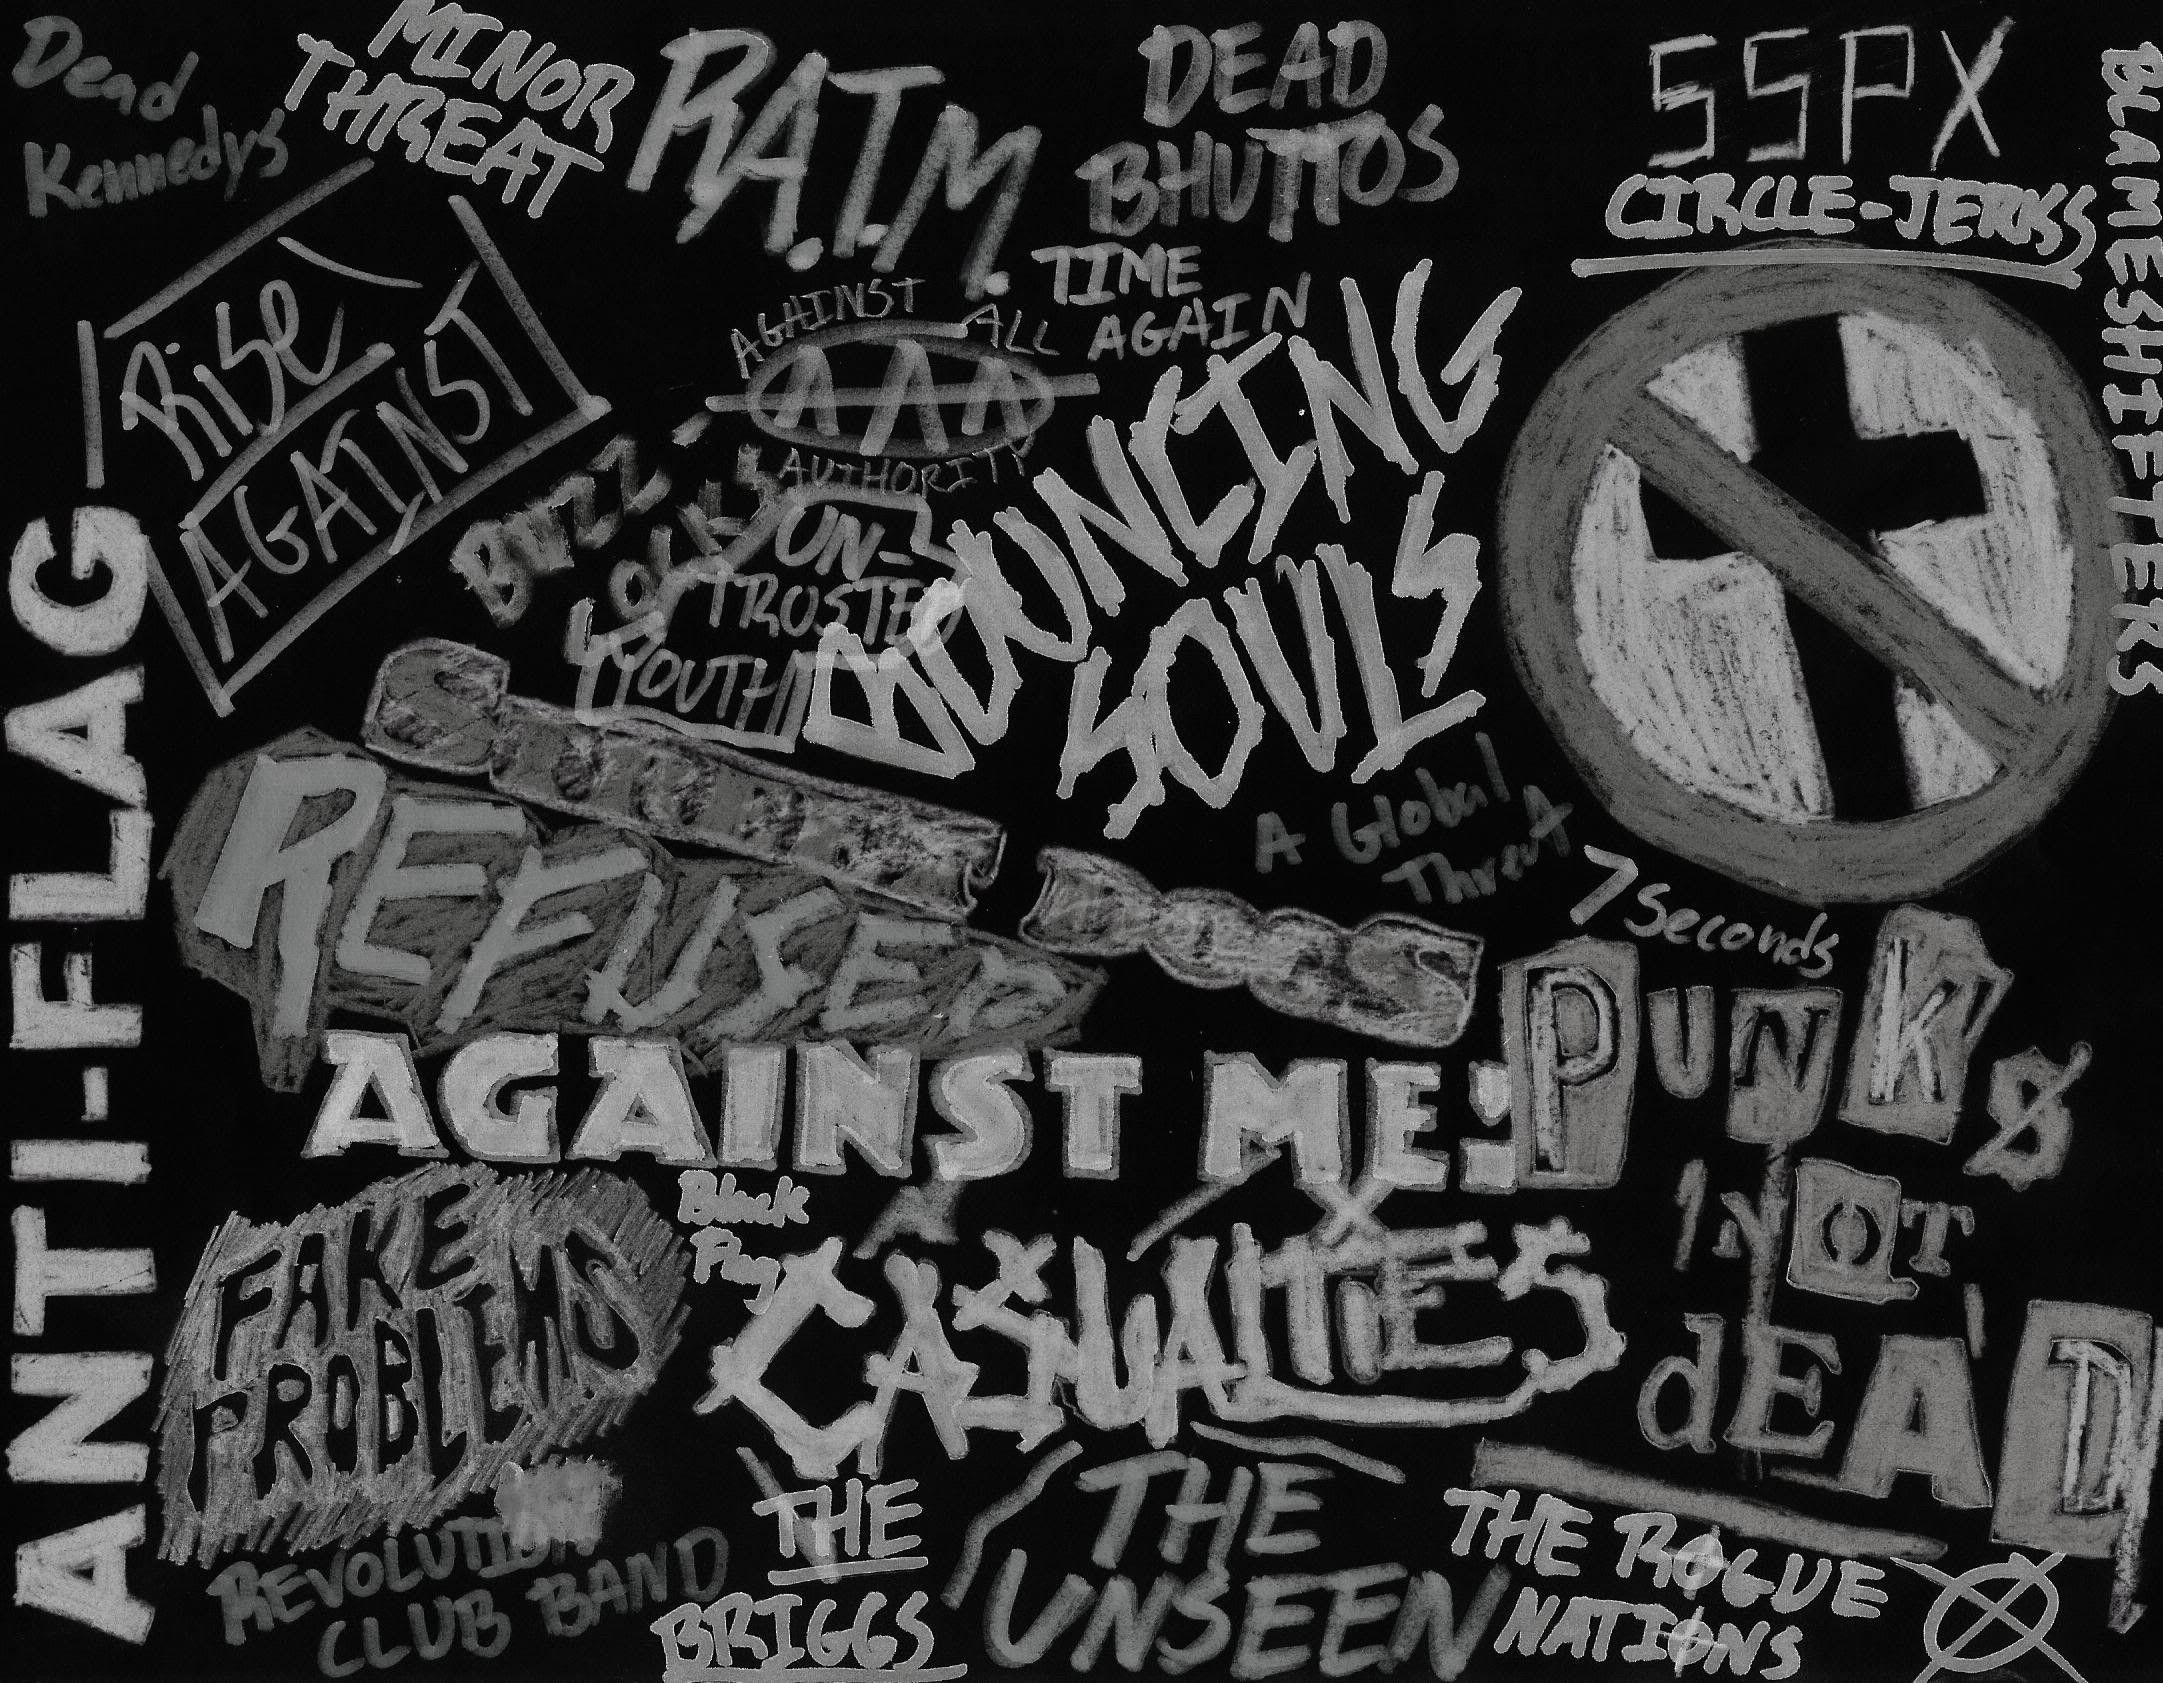 A black and white collage of band names and symbols - Punk